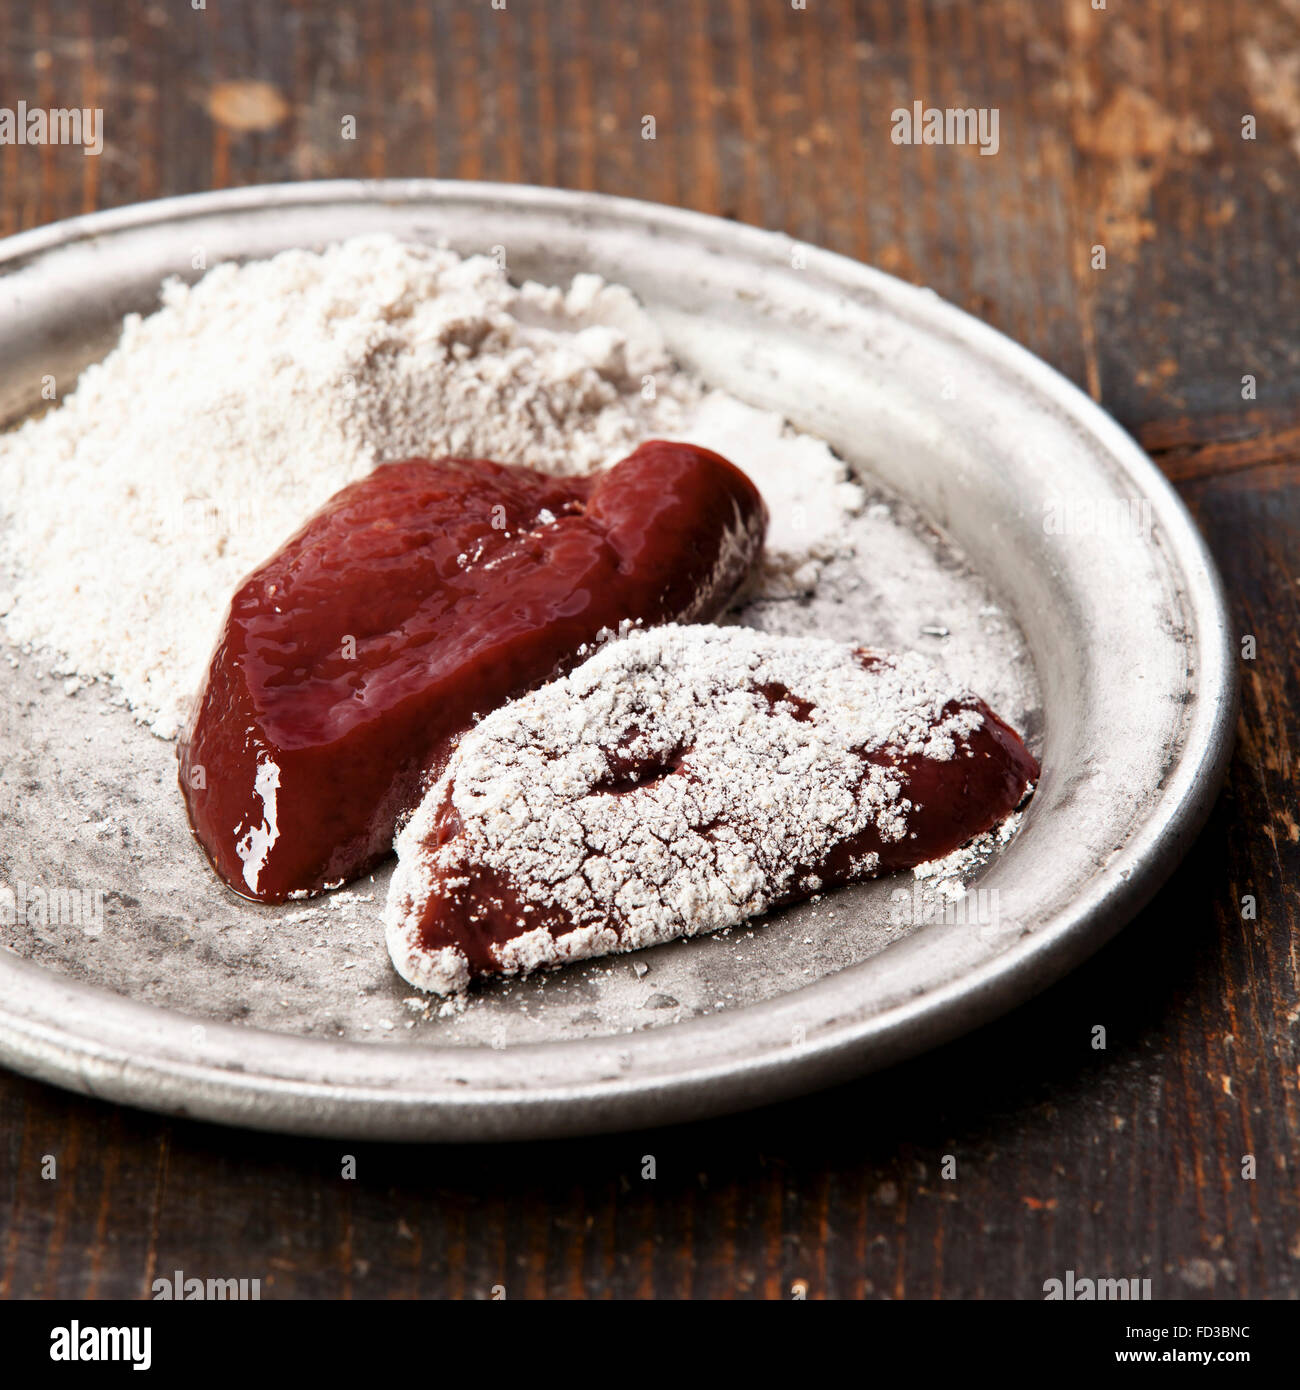 Raw liver sprinkled with flour Stock Photo